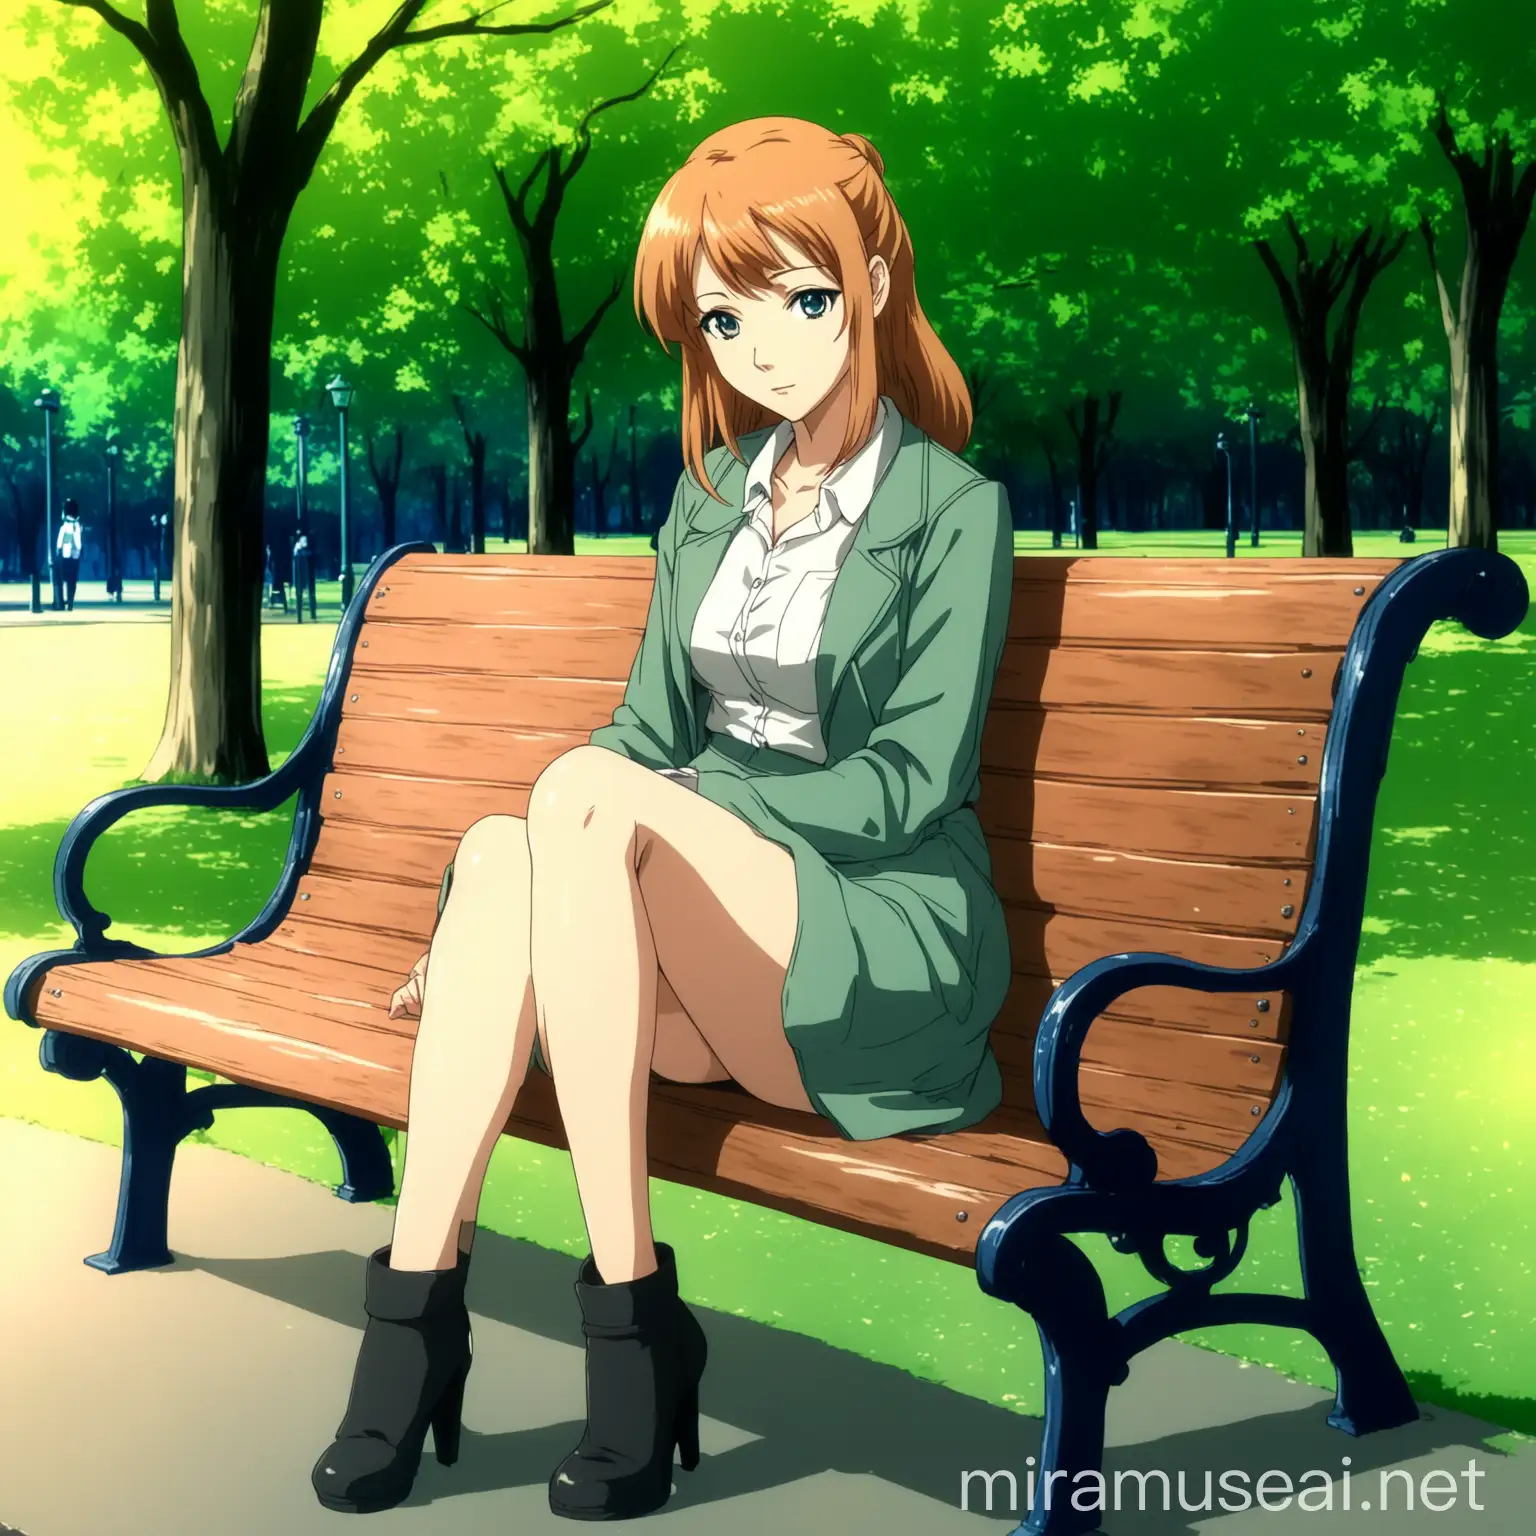 Attractive 30YearOld Woman Relaxing on Park Bench in Anime Style